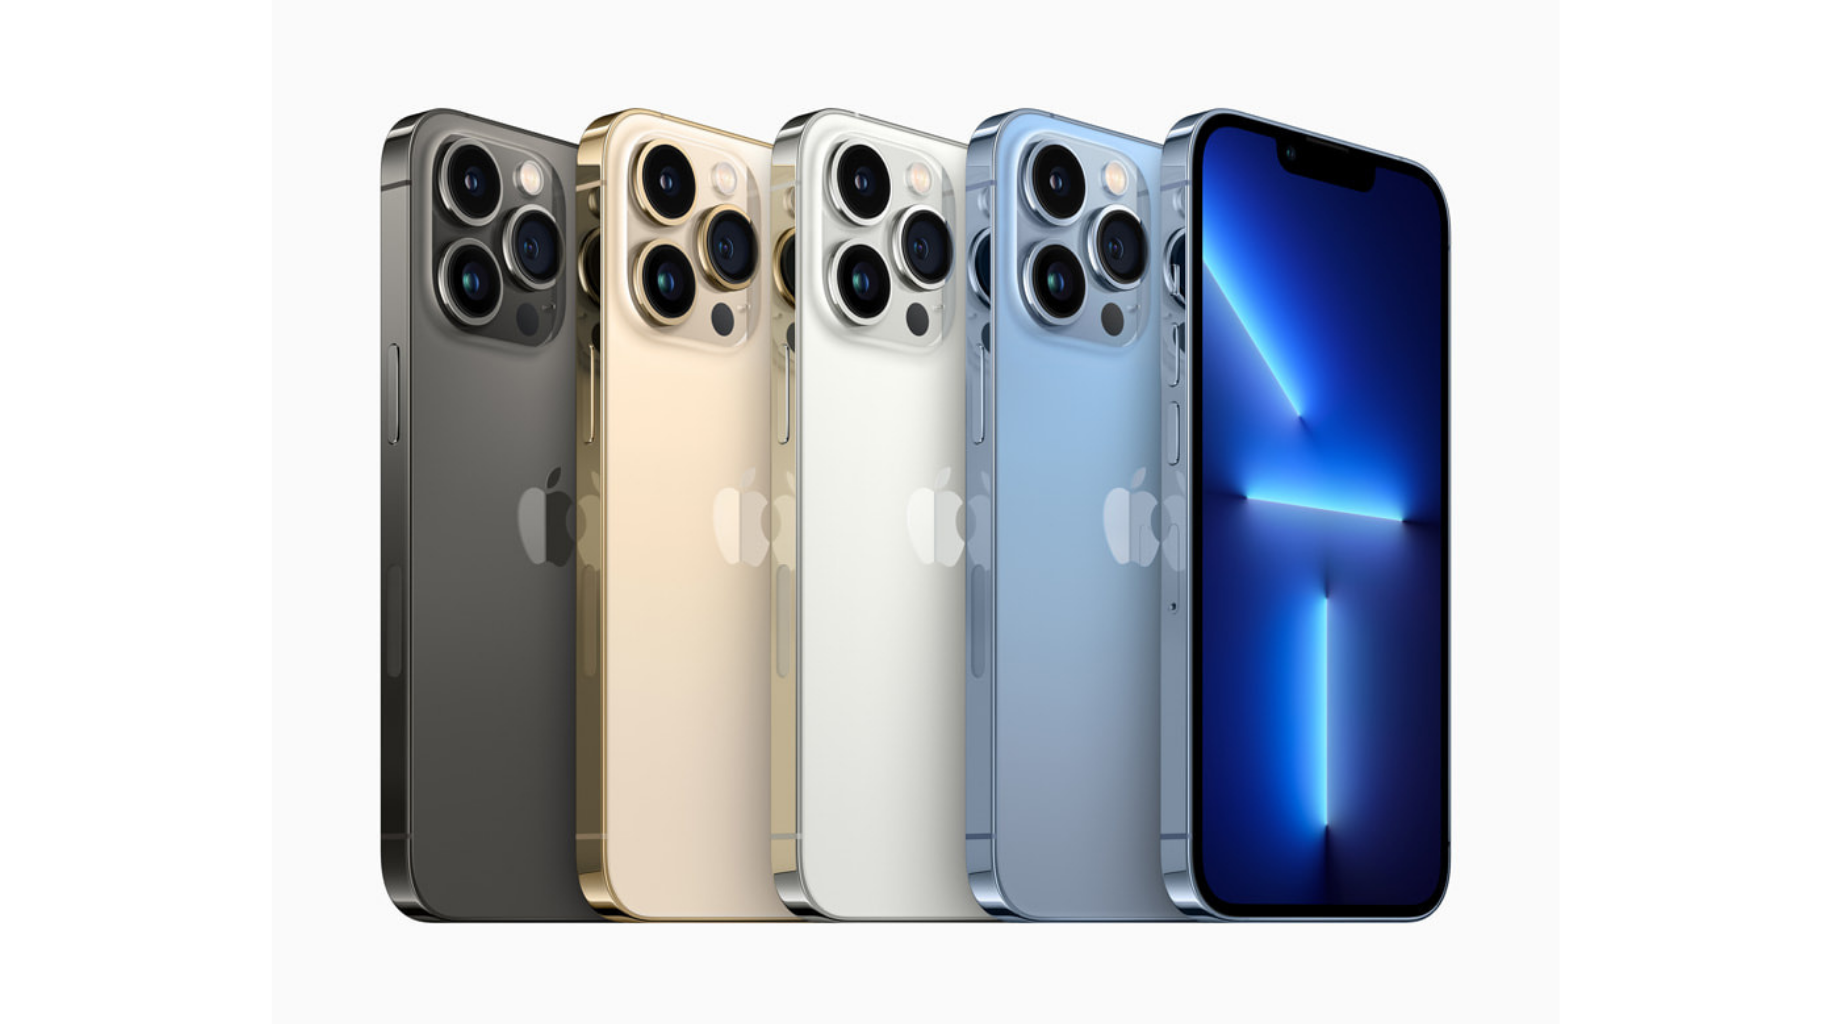 Apple To Say Goodbye To Qualcomm's 5G Modem Chips For iPhones And Switch Fully To In-House Chips By 2023: Report